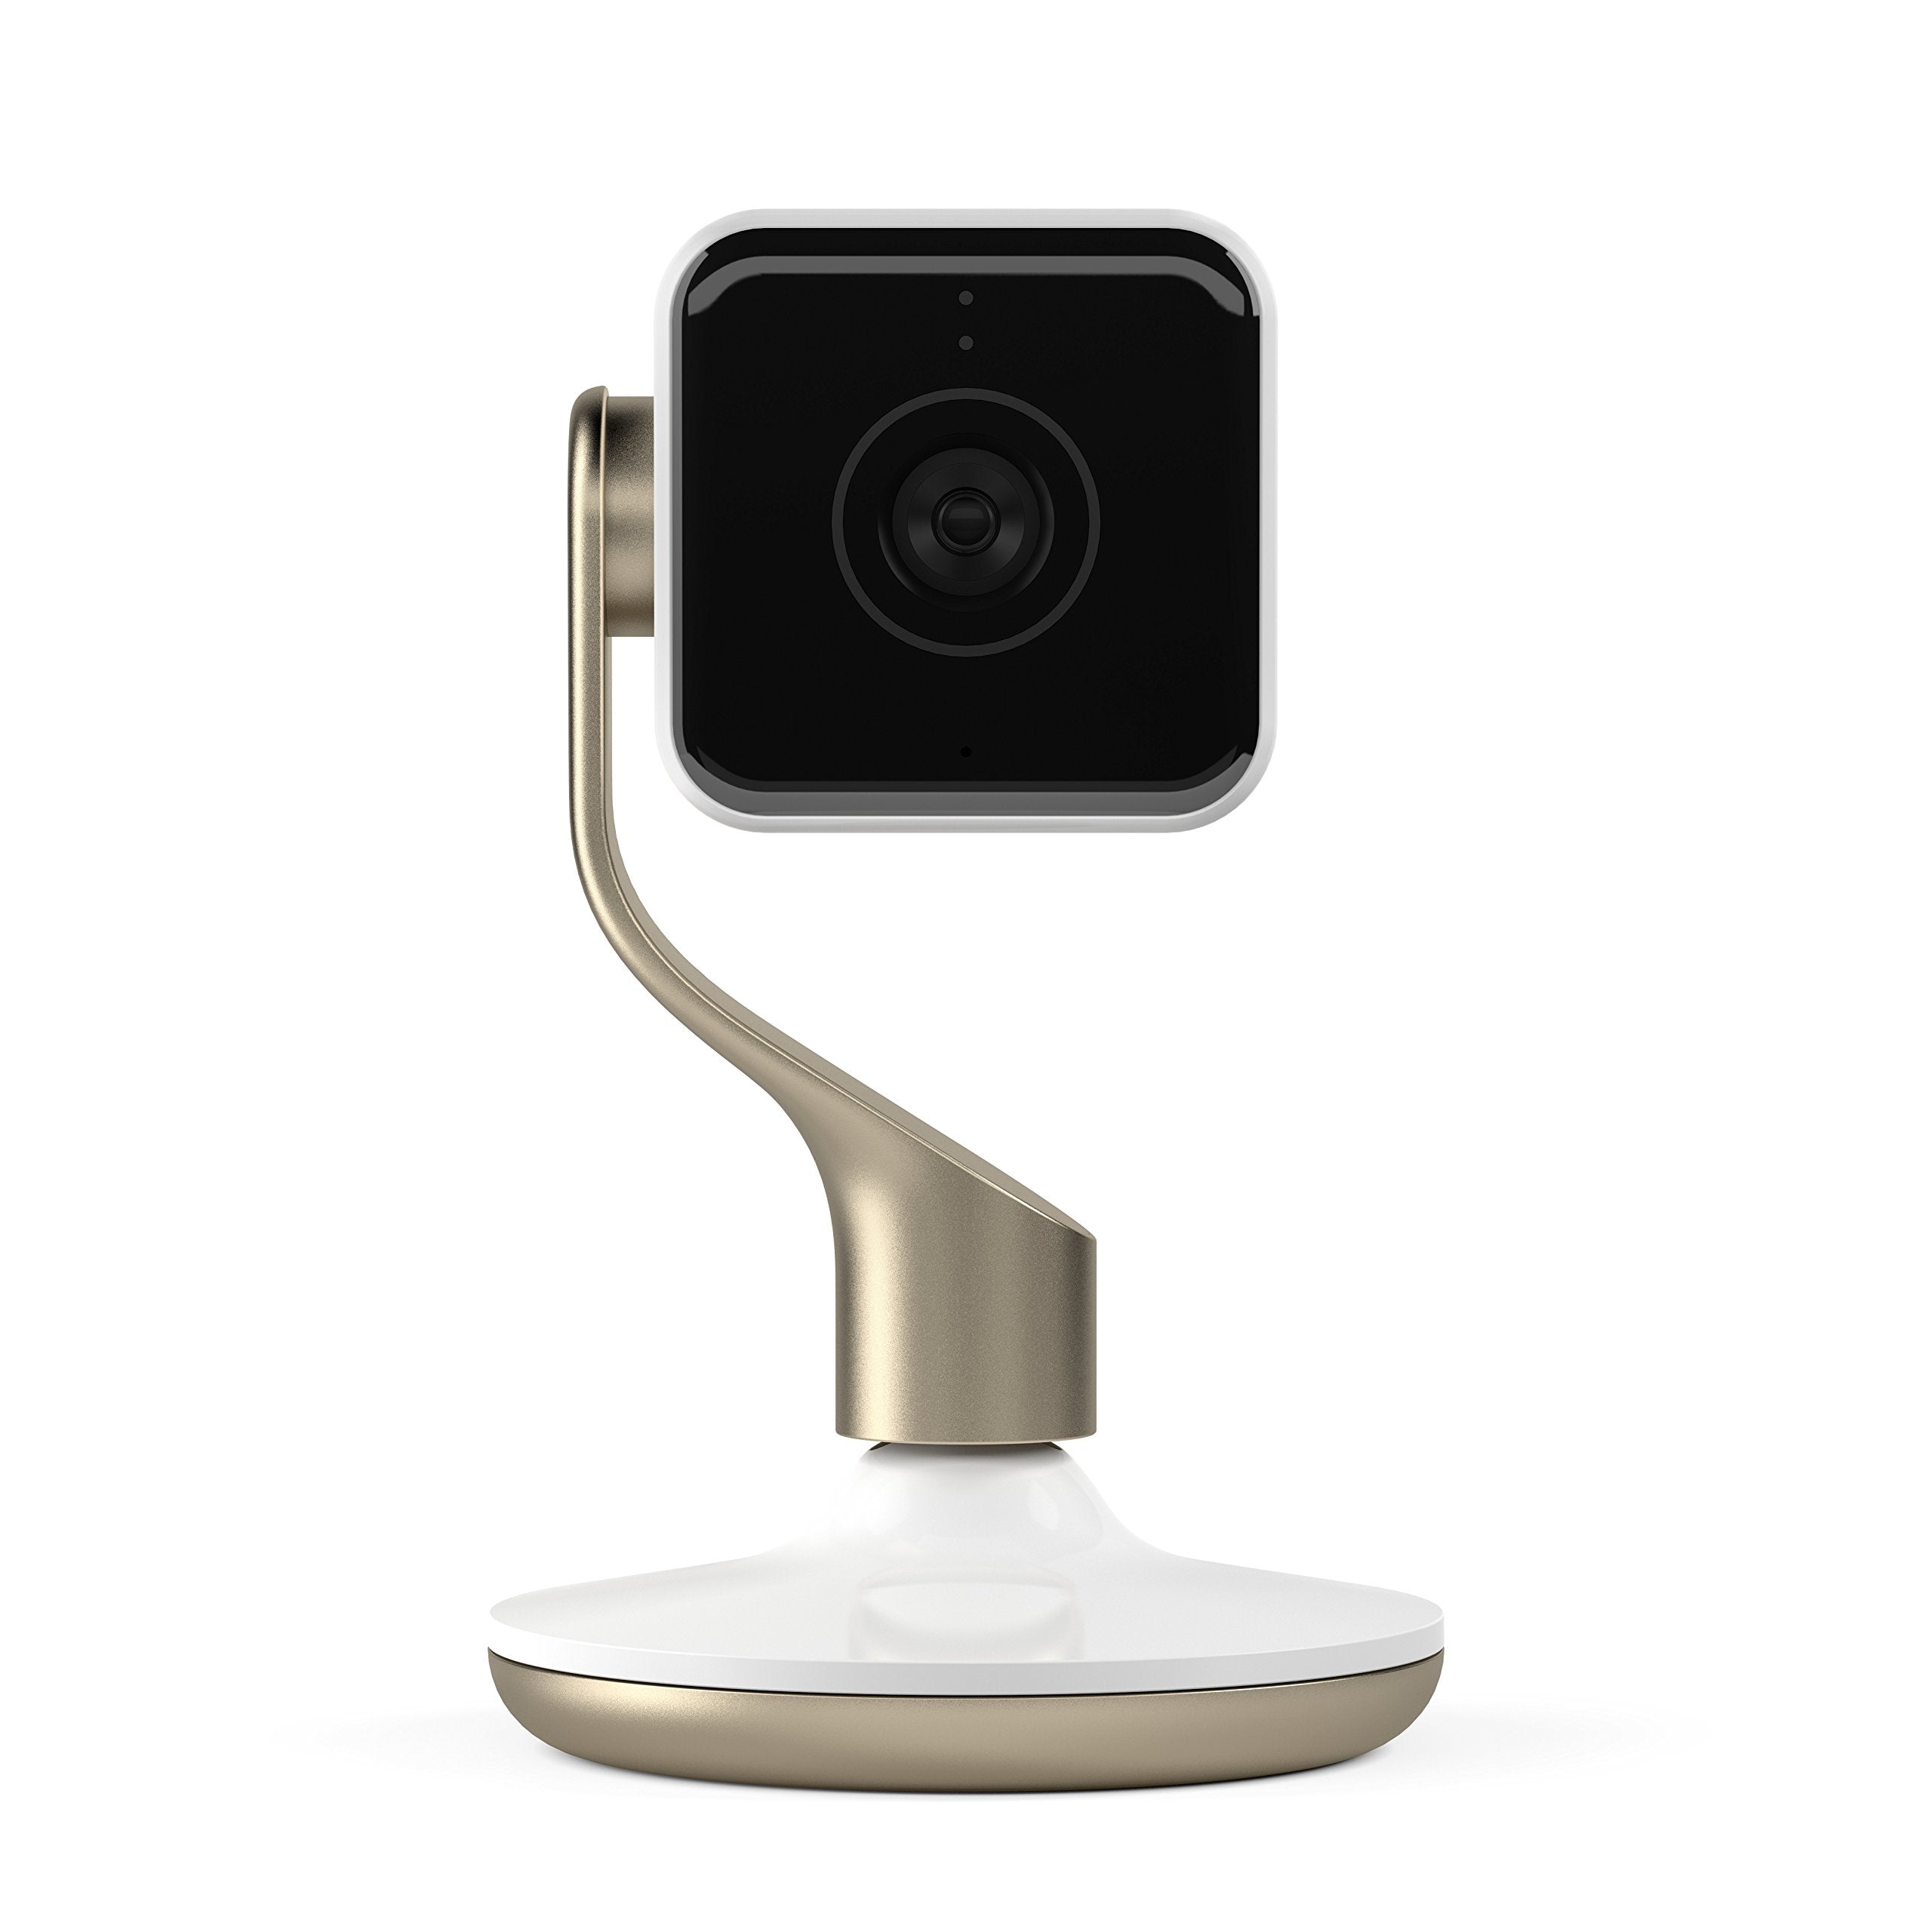 Hive UK7001720 View Indoor Security Camera - White & Champagne Gold, 14.5 cm*8.8 cm*8.8 cm